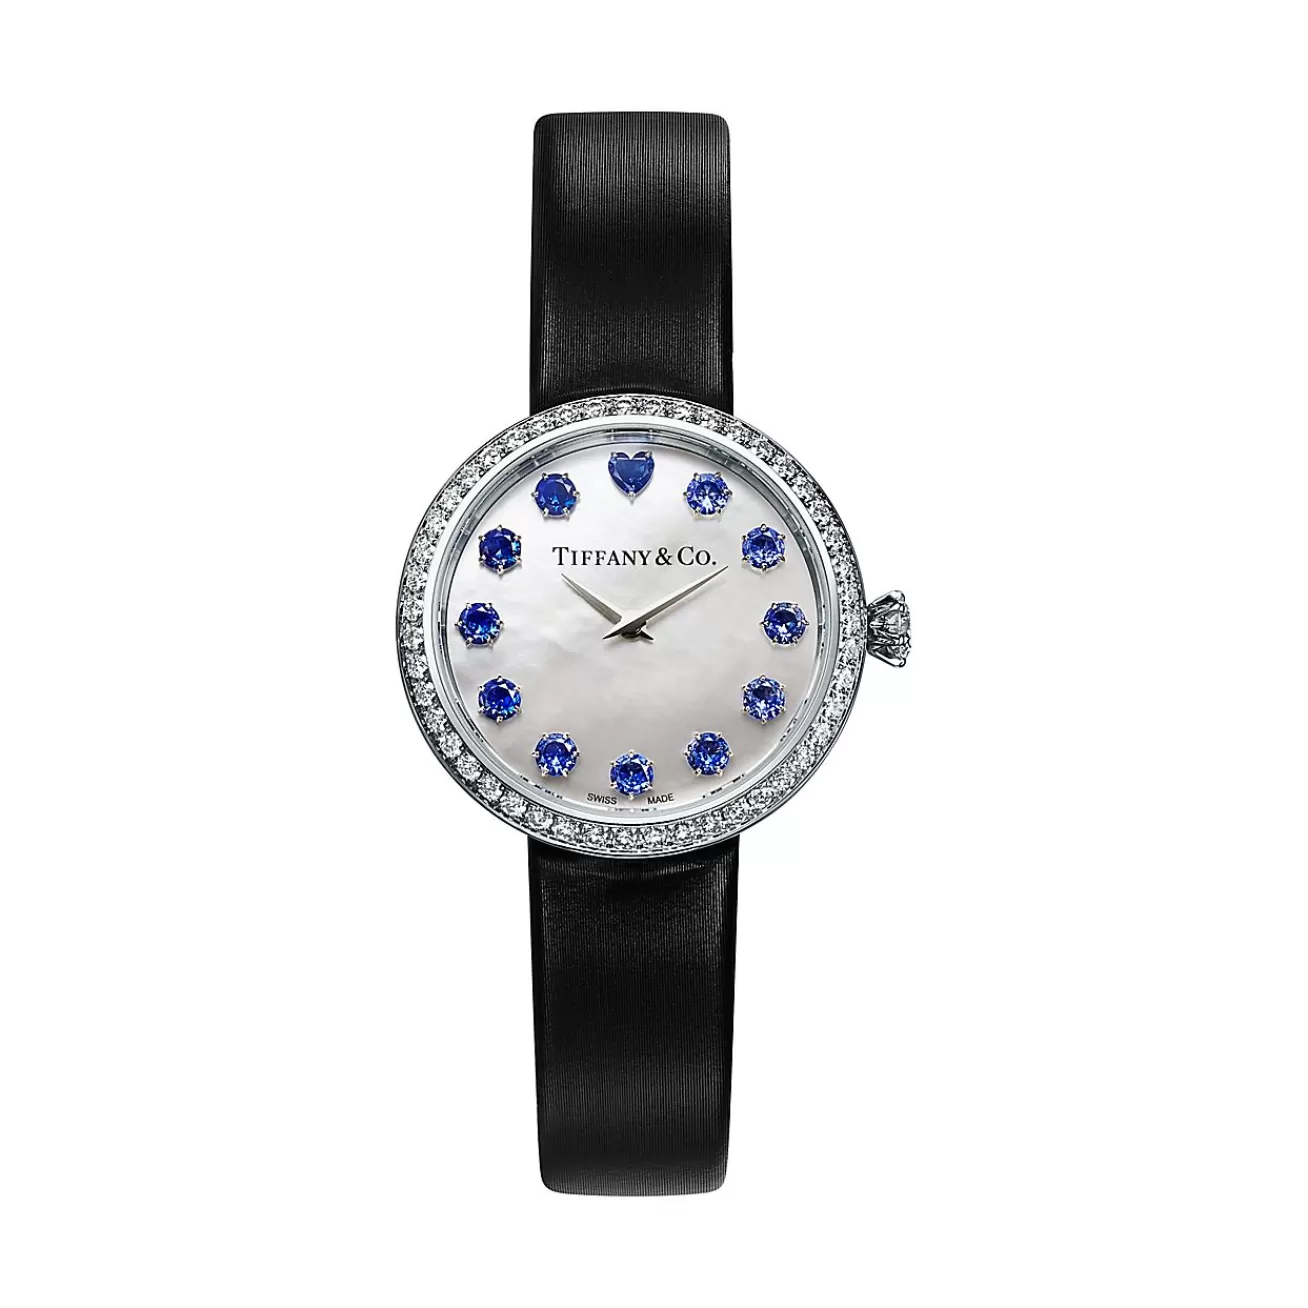 Tiffany & Co. Tiffany Eternity 28 MM Round Watch in White Gold with Sapphires and Diamonds | ^ Fine Watches